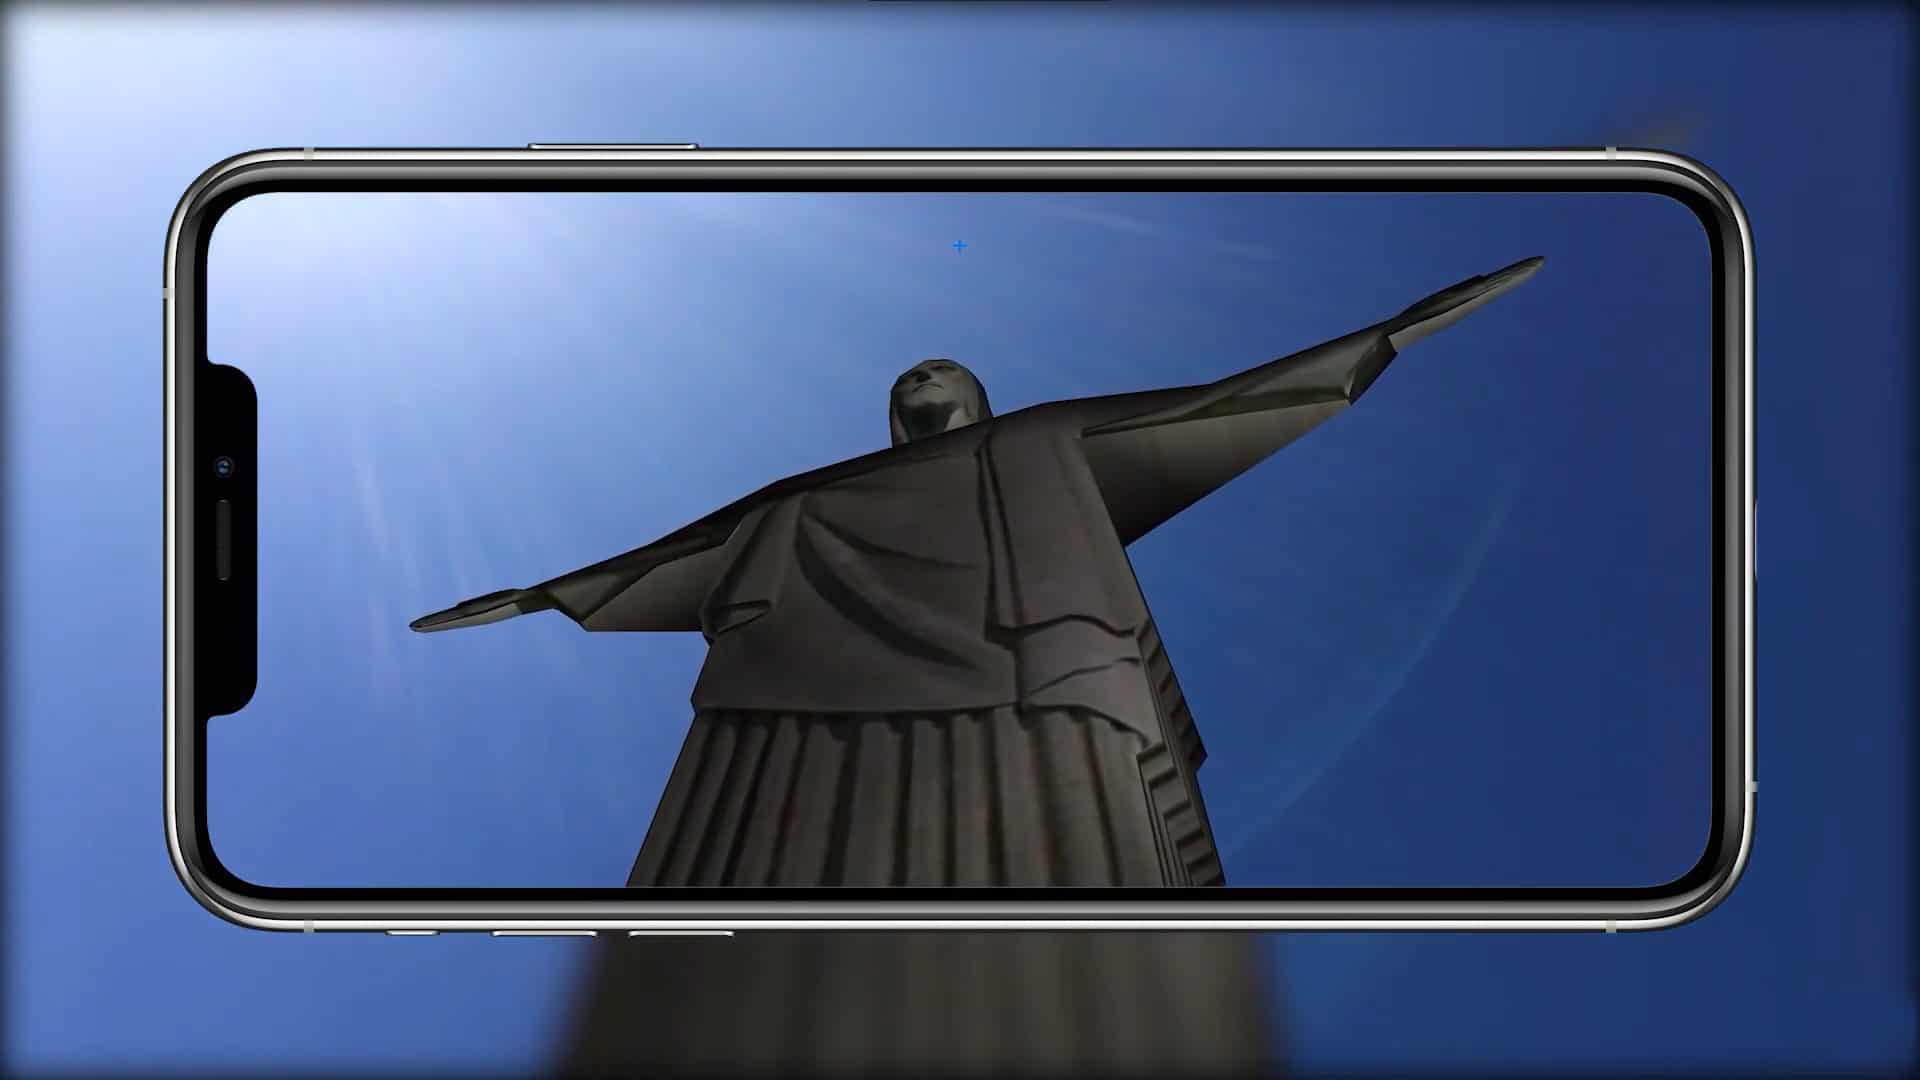 ar-media player augmented reality christ the redeemer 3D model